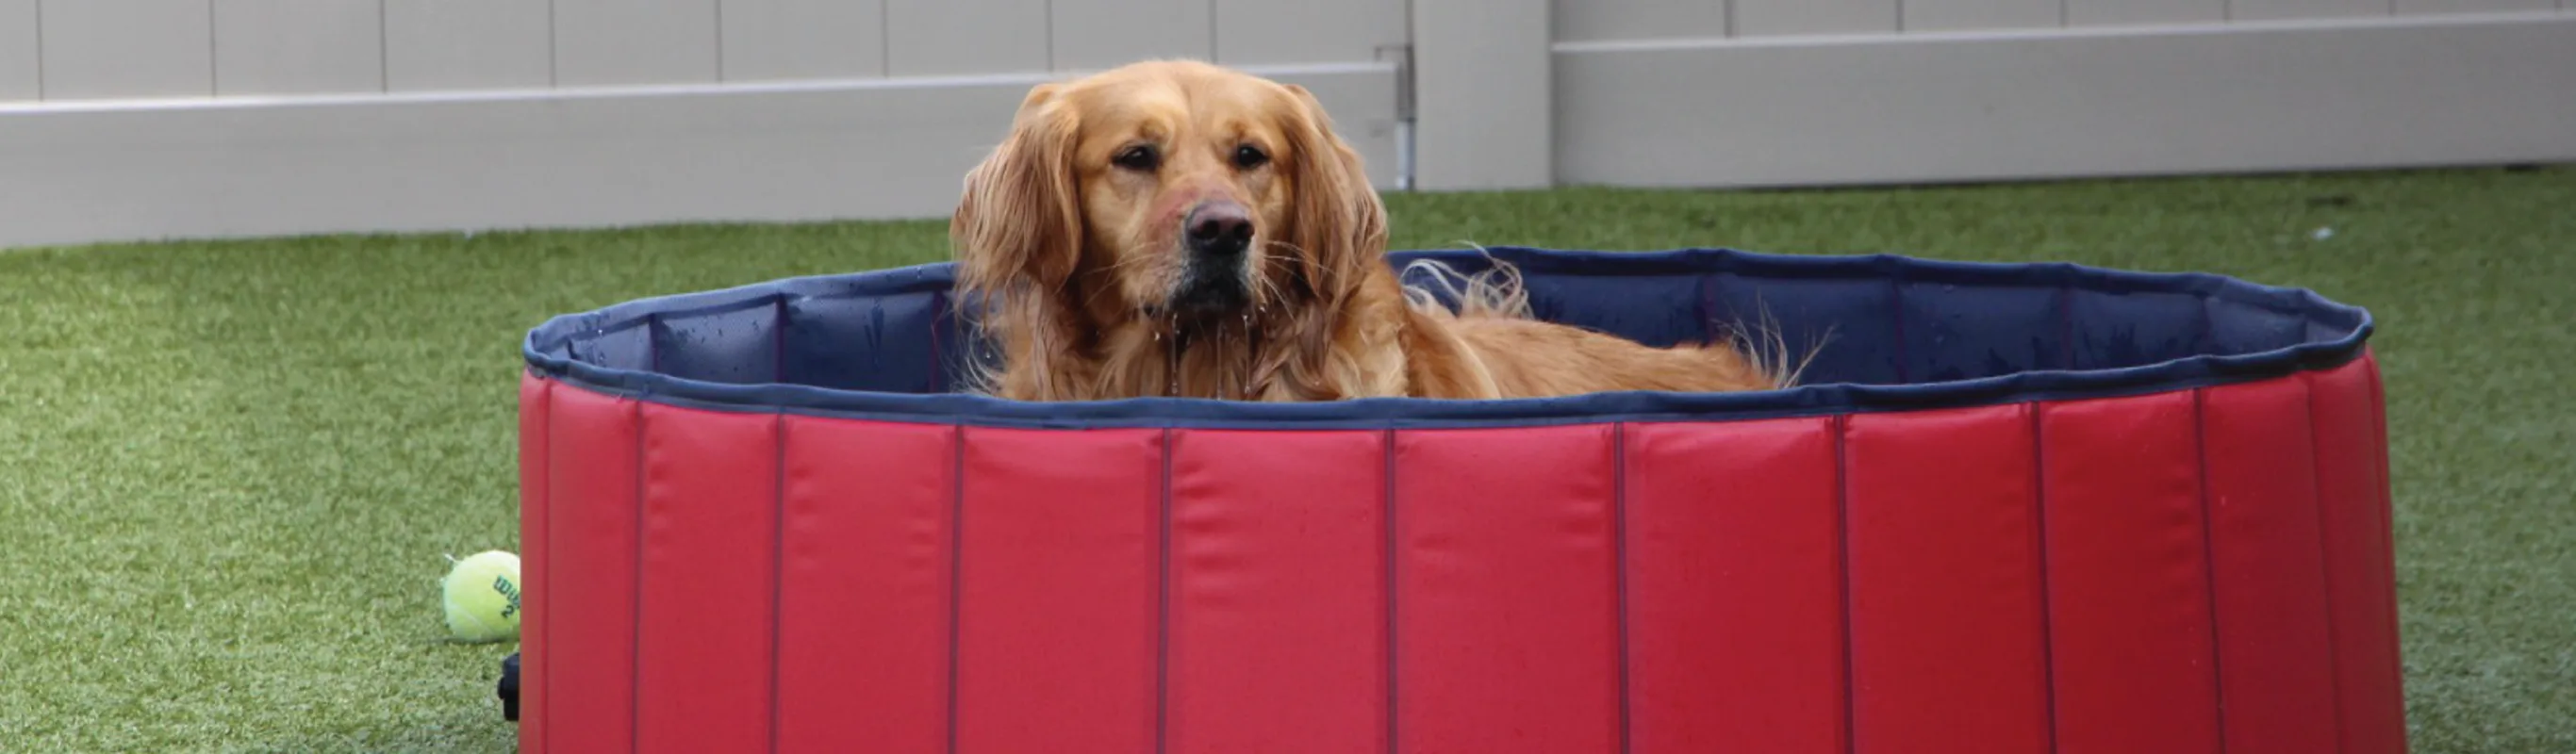 Dog laying down outside in red tub